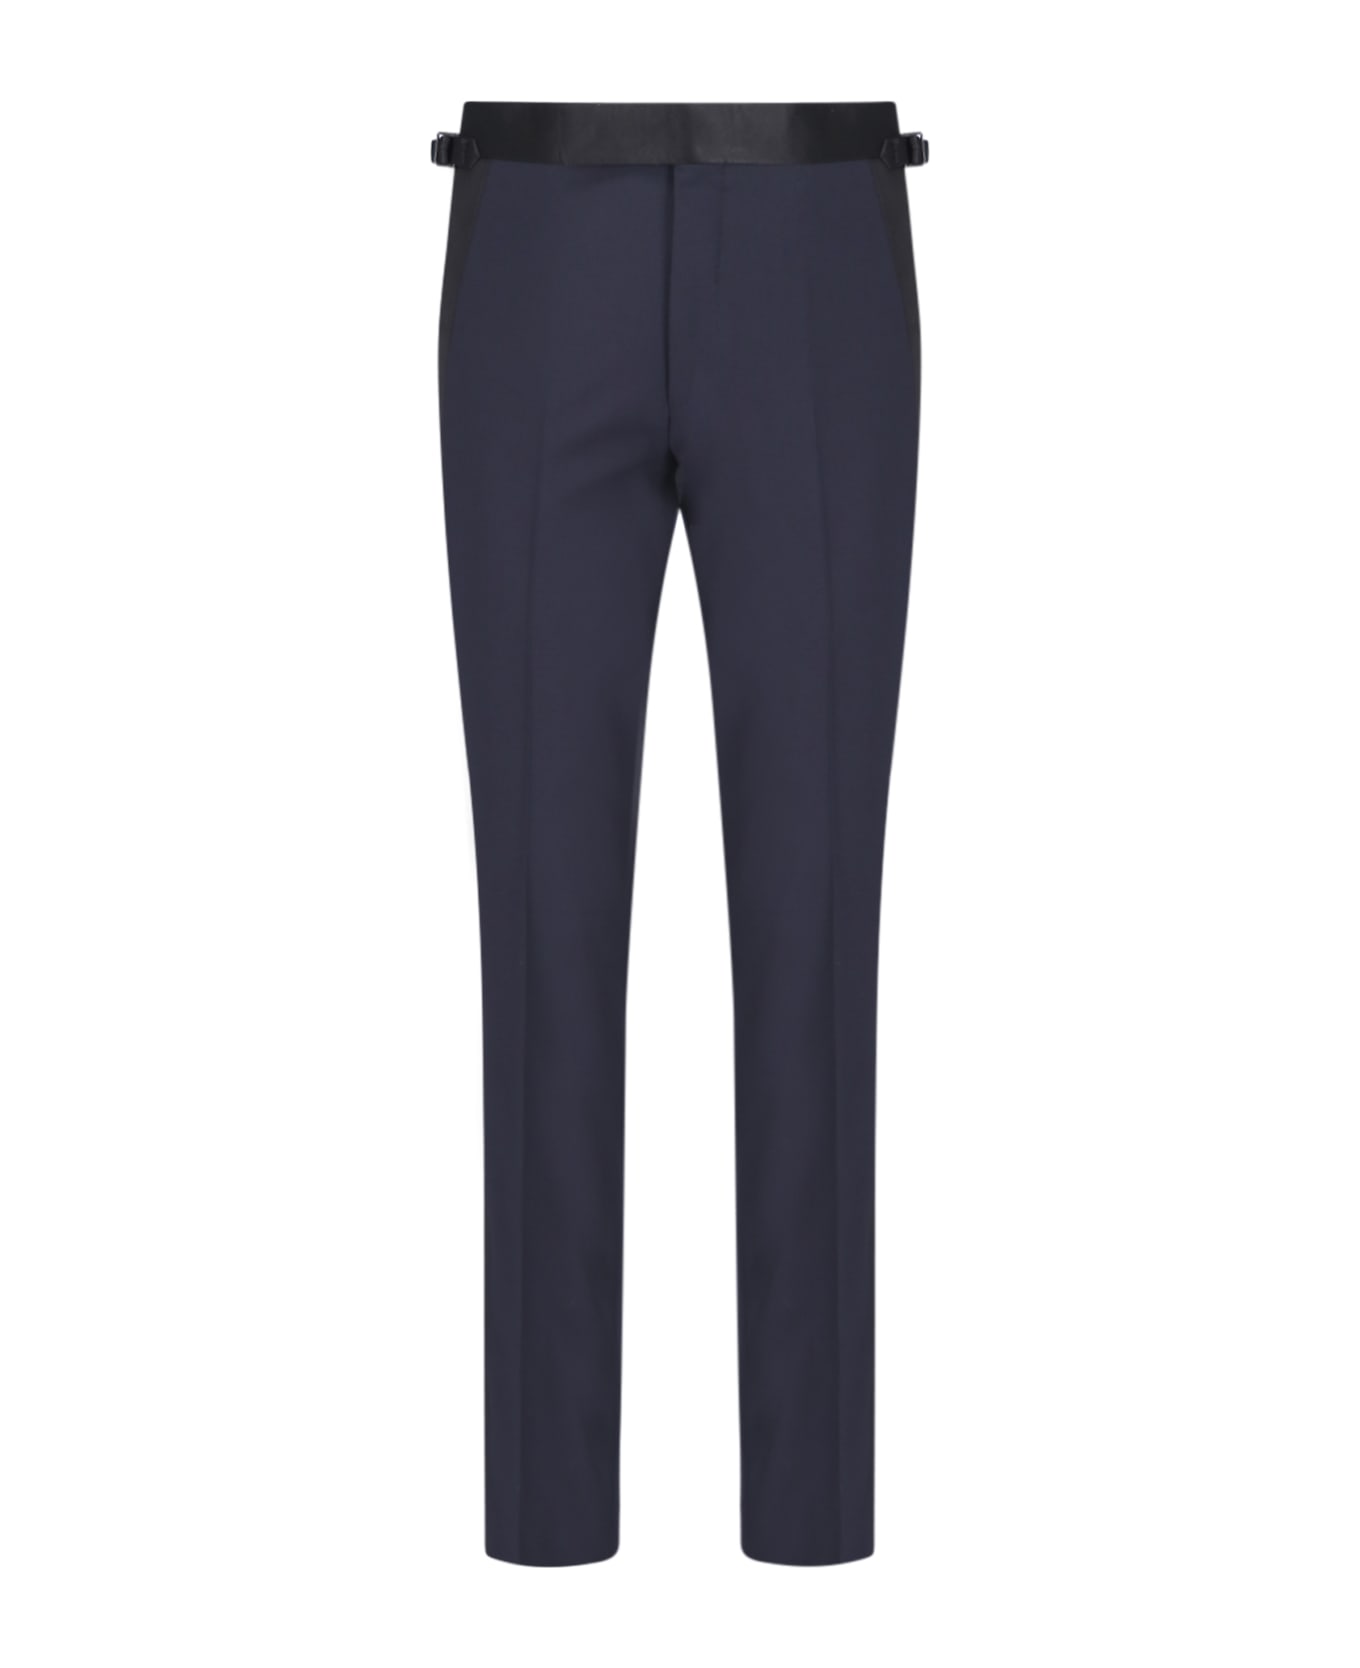 Tom Ford Single-breasted Suit - Blue